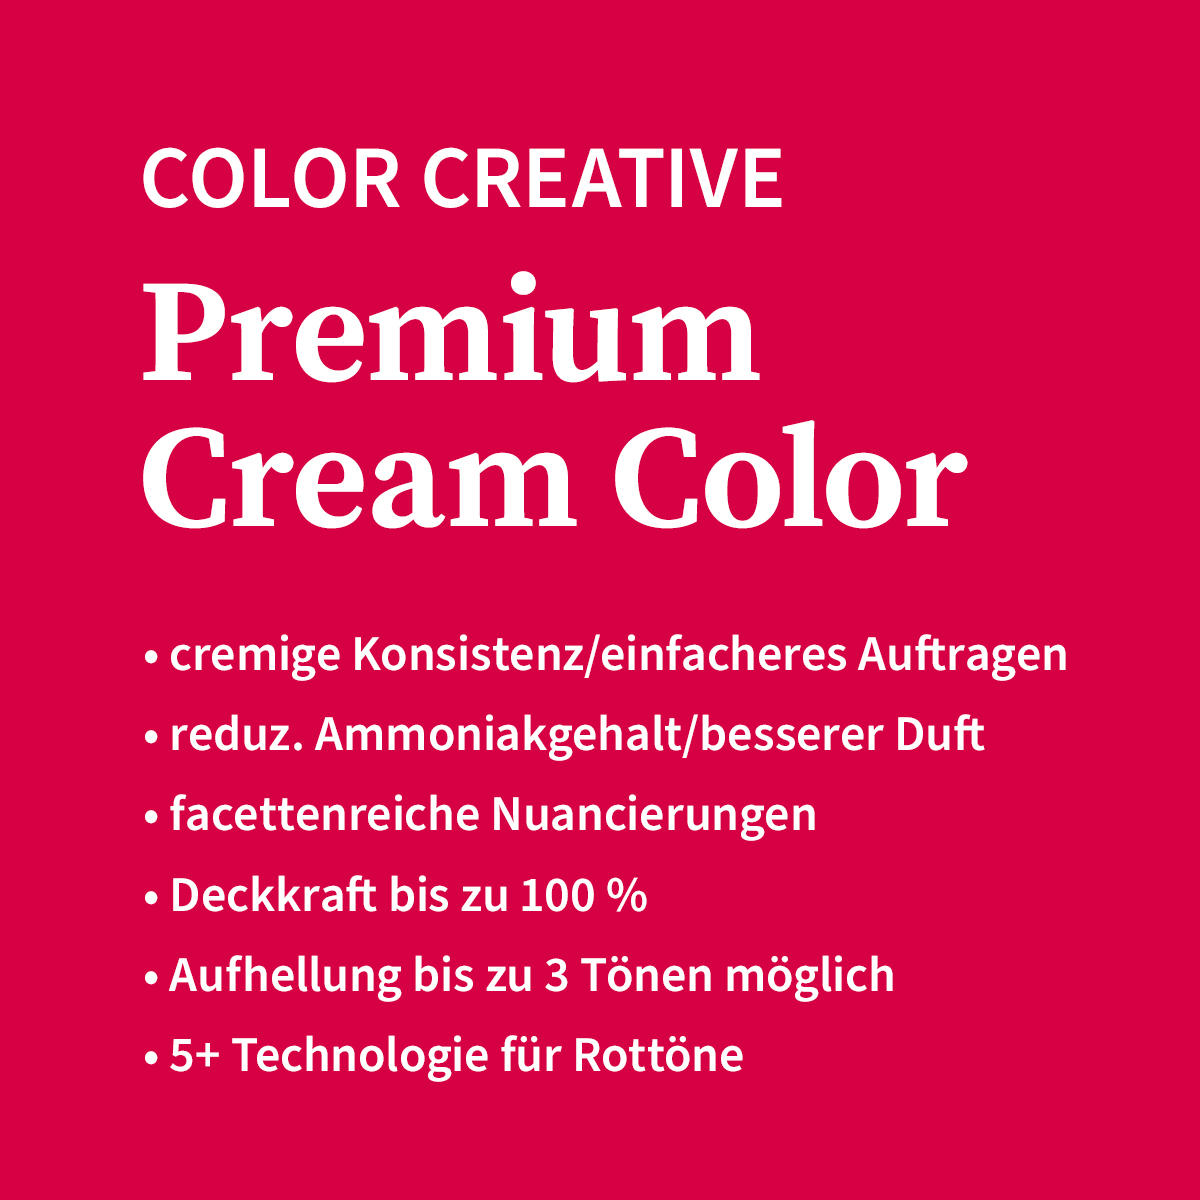 Basler Color Creative Premium Cream Color 8/44 light blond red intense - intense ruby red, tube 60 ml - 4